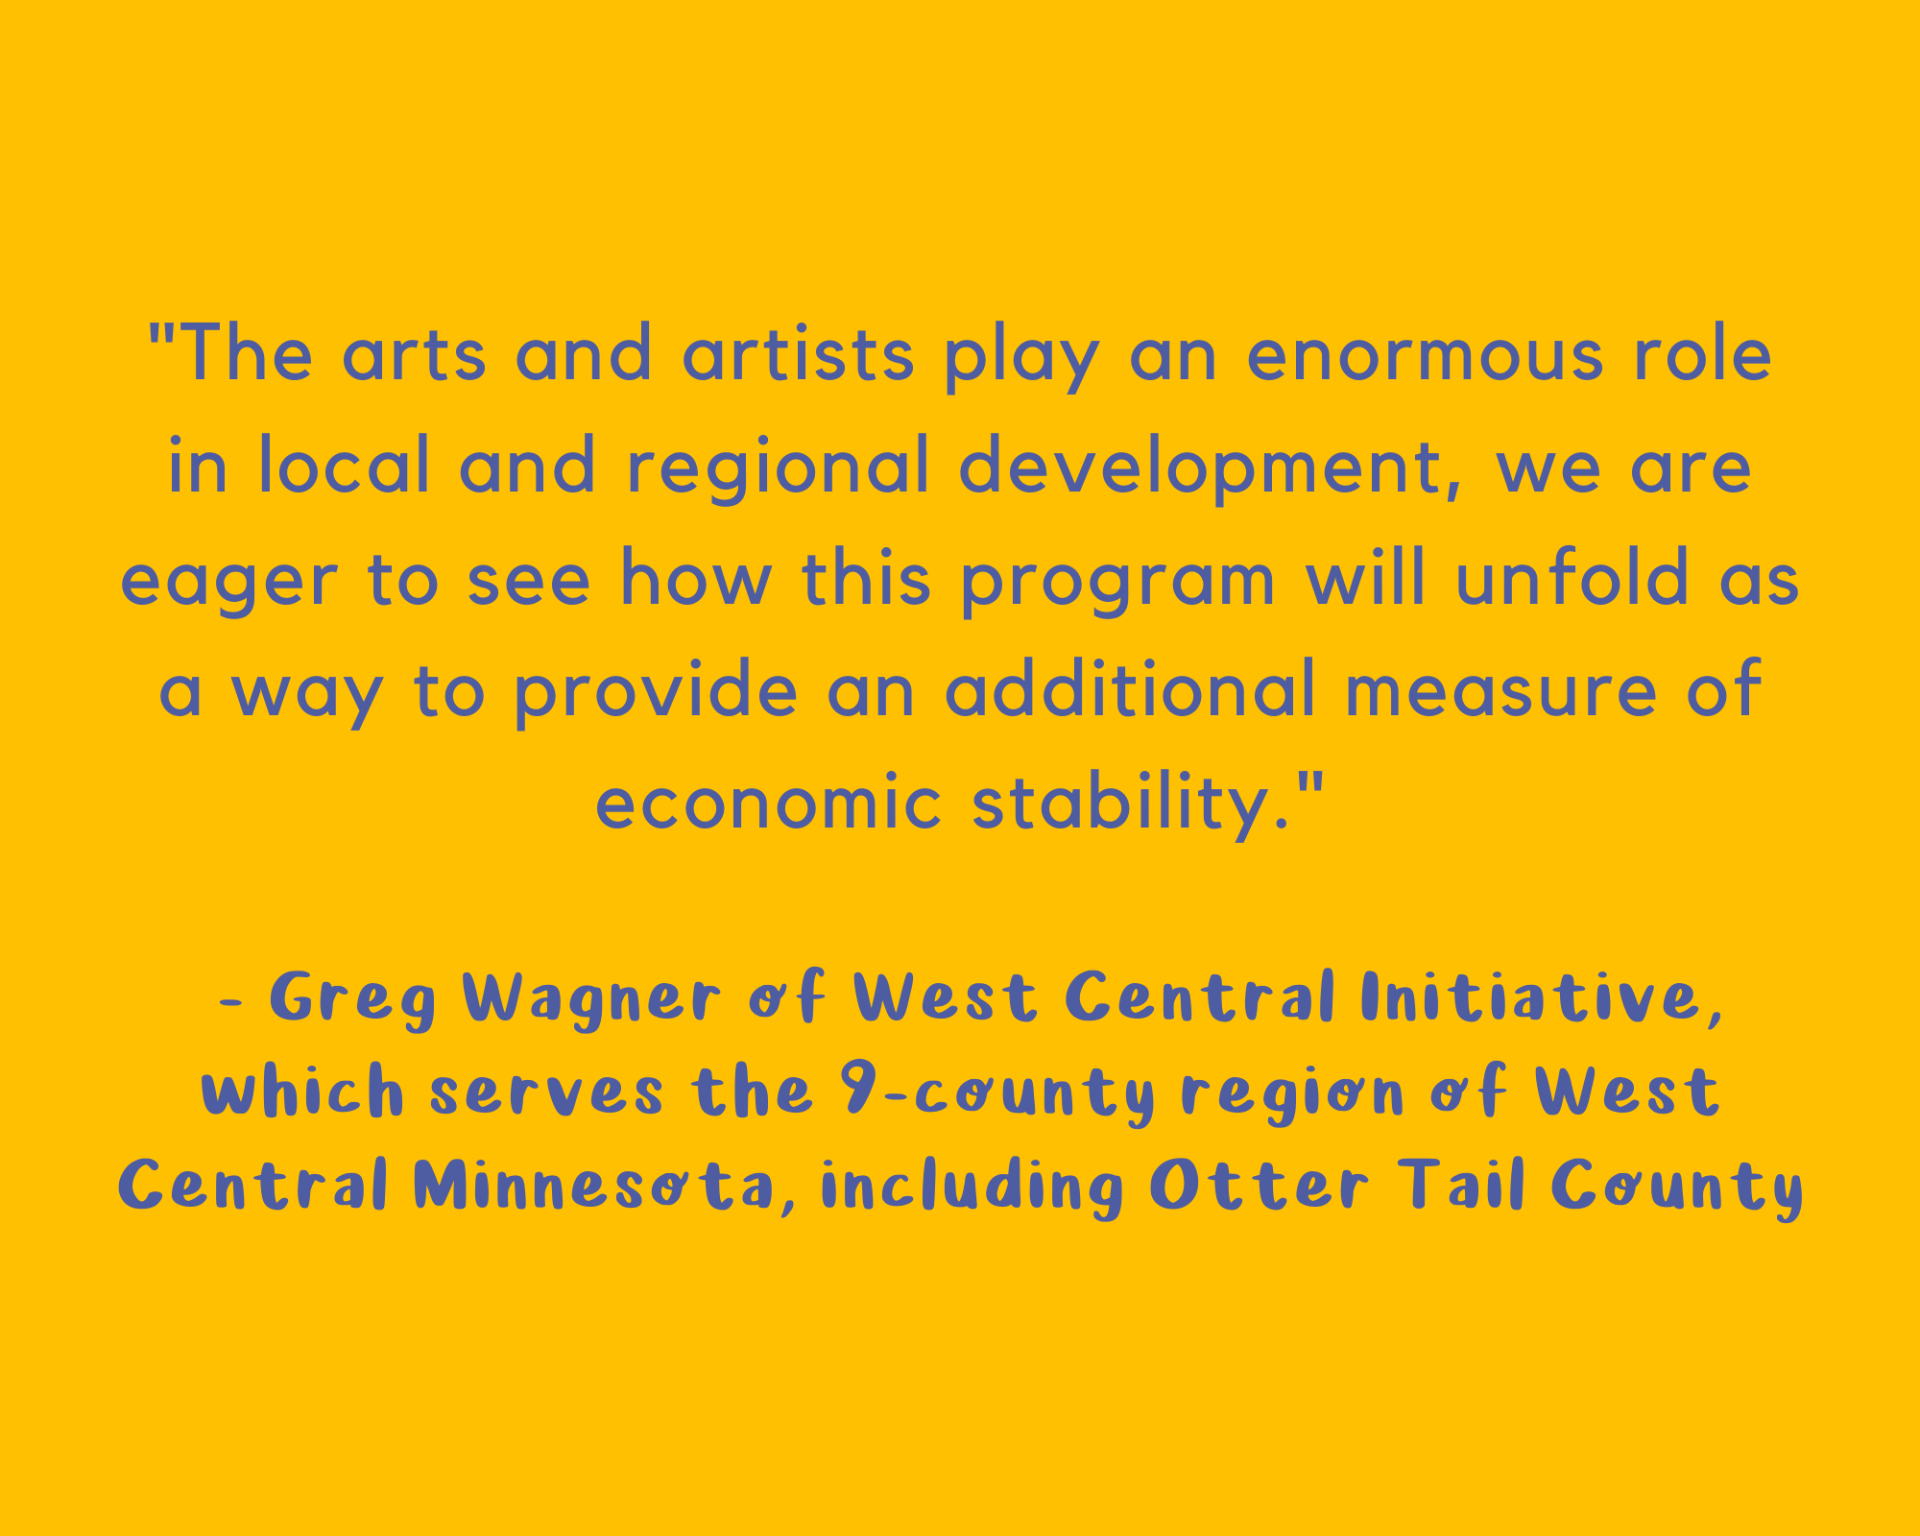 Greg Wagner, West Central Initiative quote on Guaranteed Minimum Income